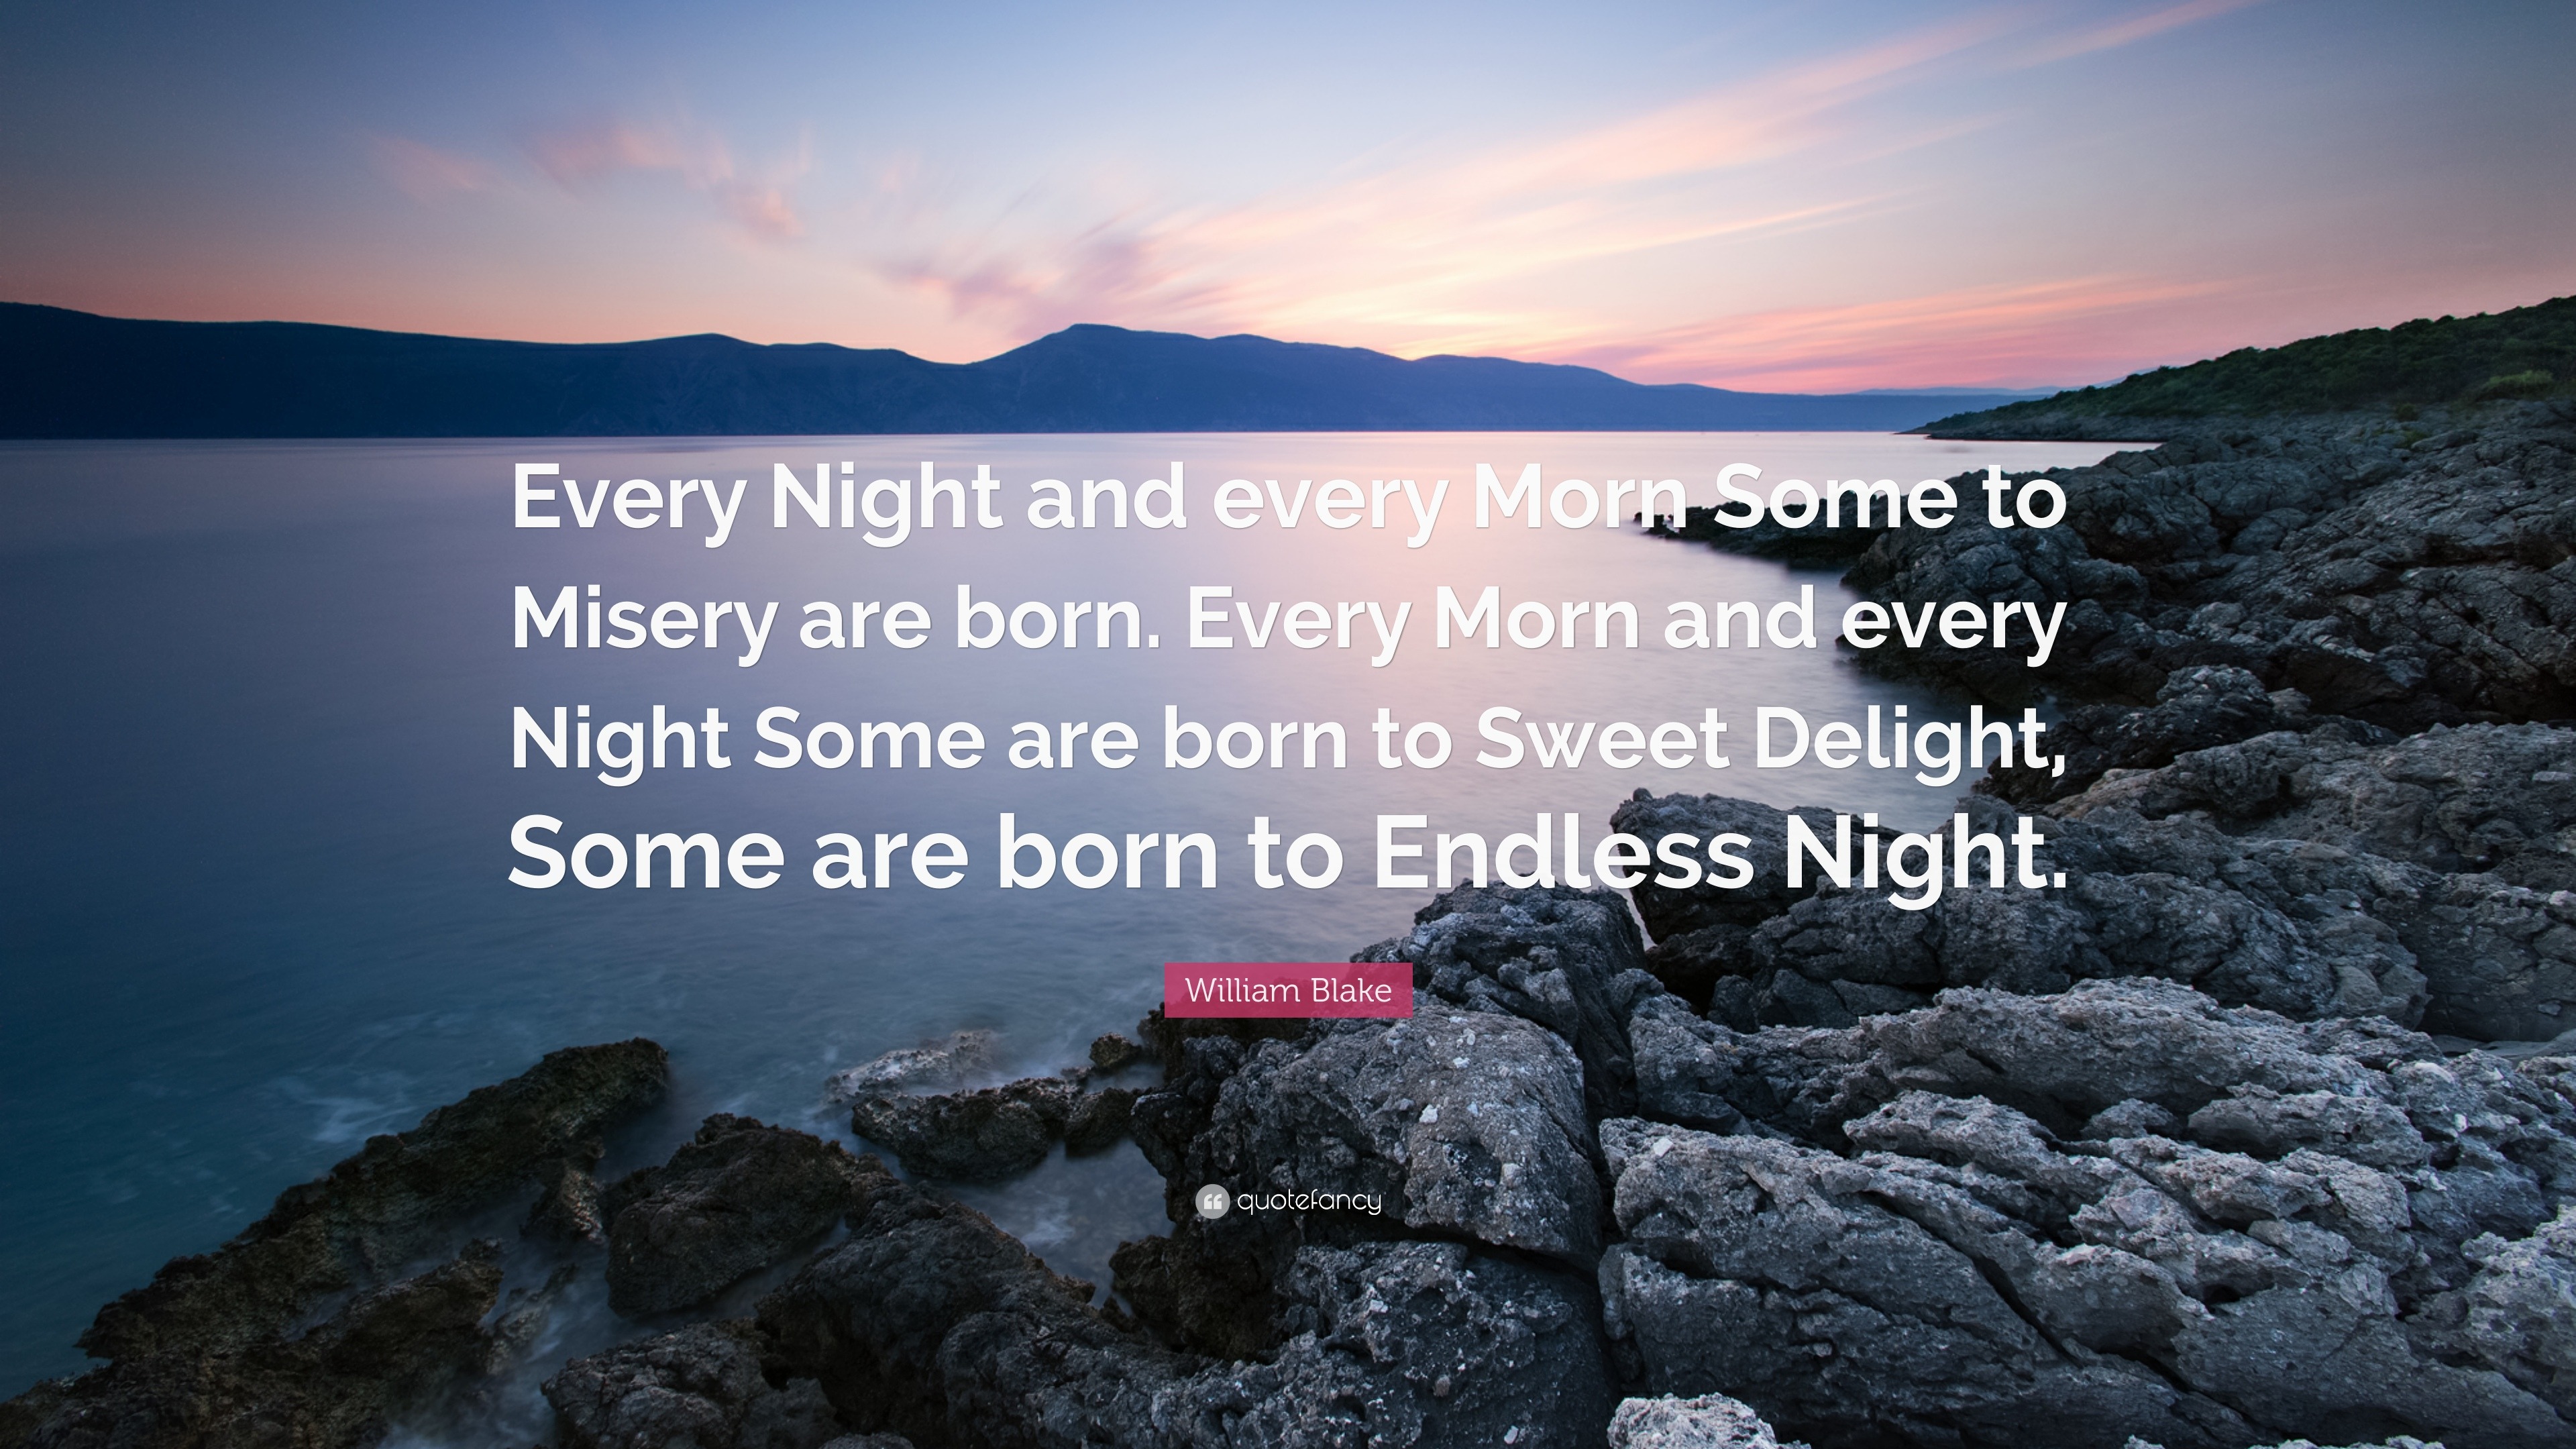 William Blake Quote “Every Night and every Morn Some to Misery are born. Every Morn and every